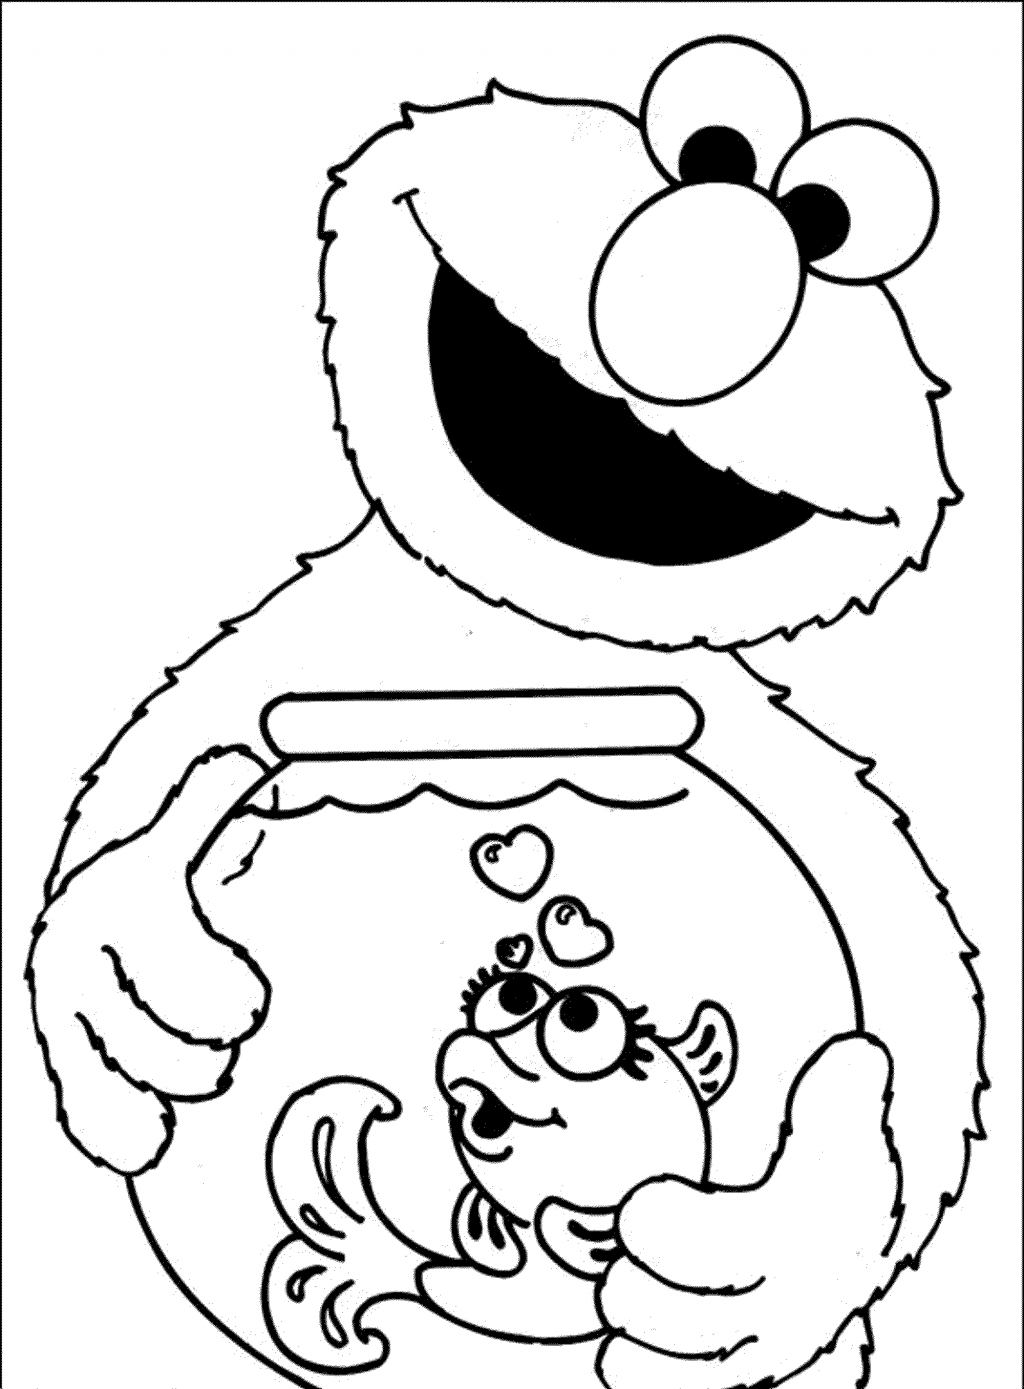 Coloring Pages ~ Coloring Pages Free Printable Best Of Printoad Elmo - Elmo Color Pages Free Printable